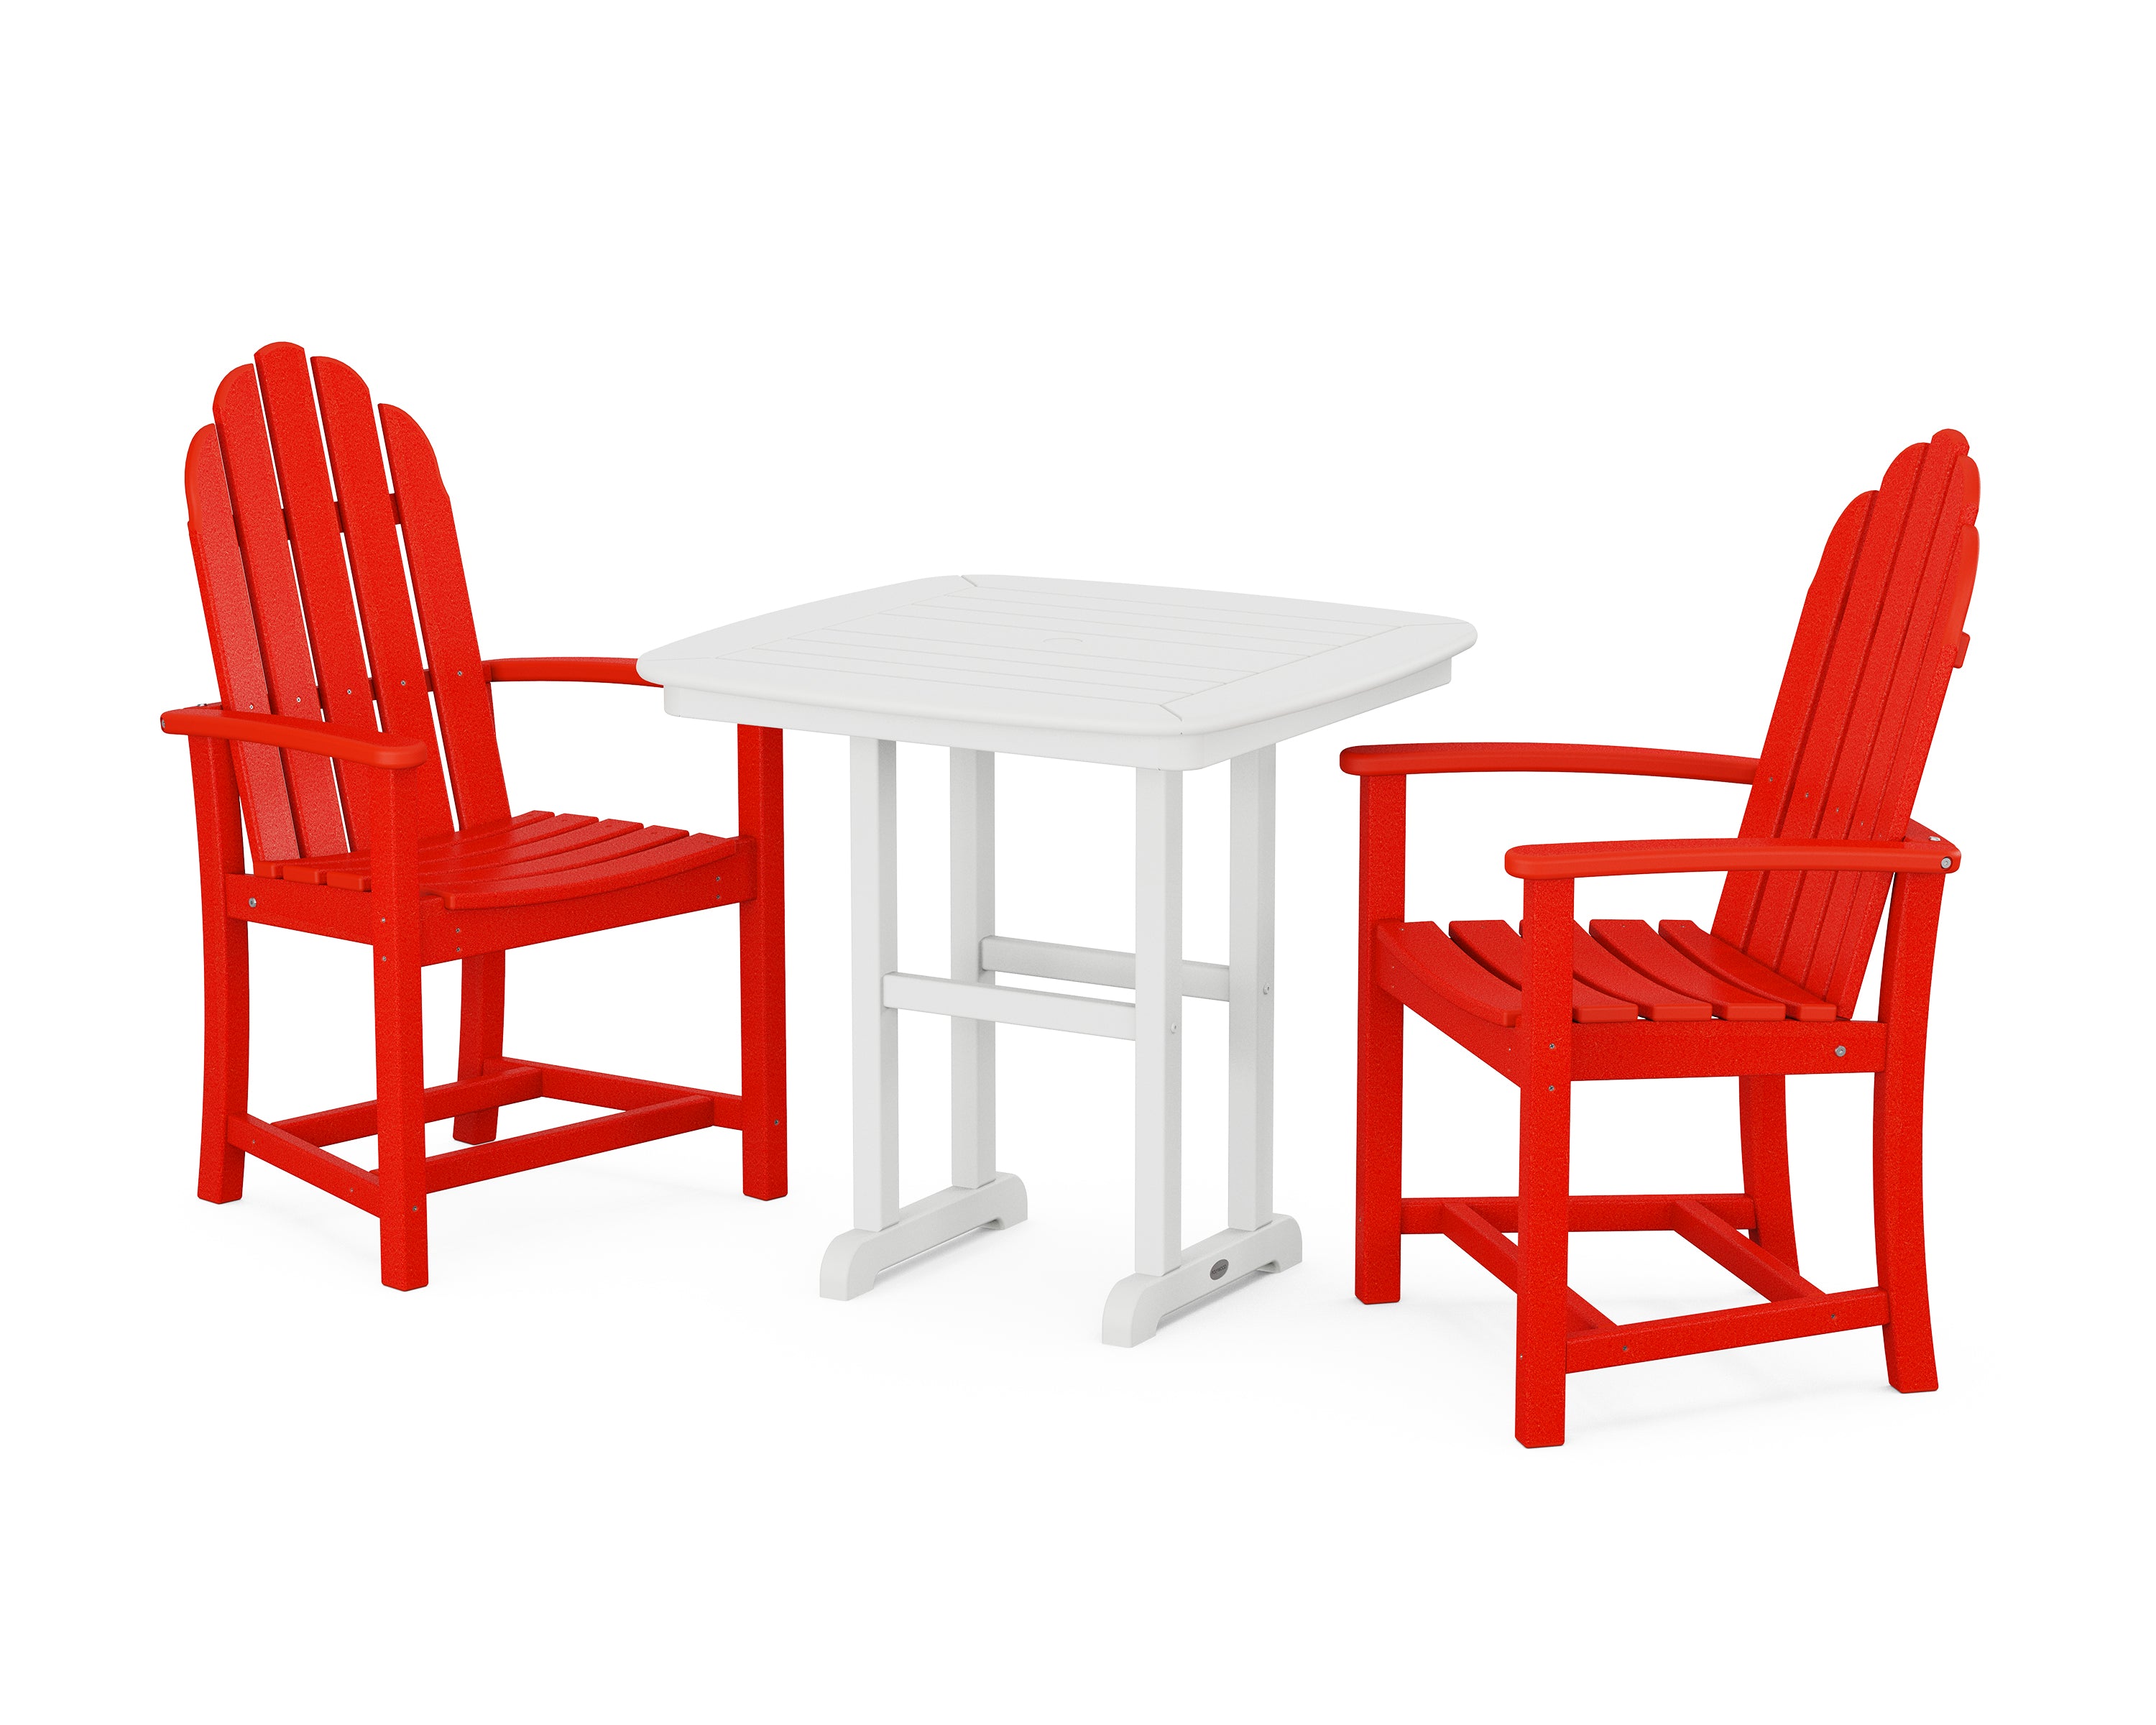 POLYWOOD® Classic Adirondack 3-Piece Dining Set in Sunset Red / White